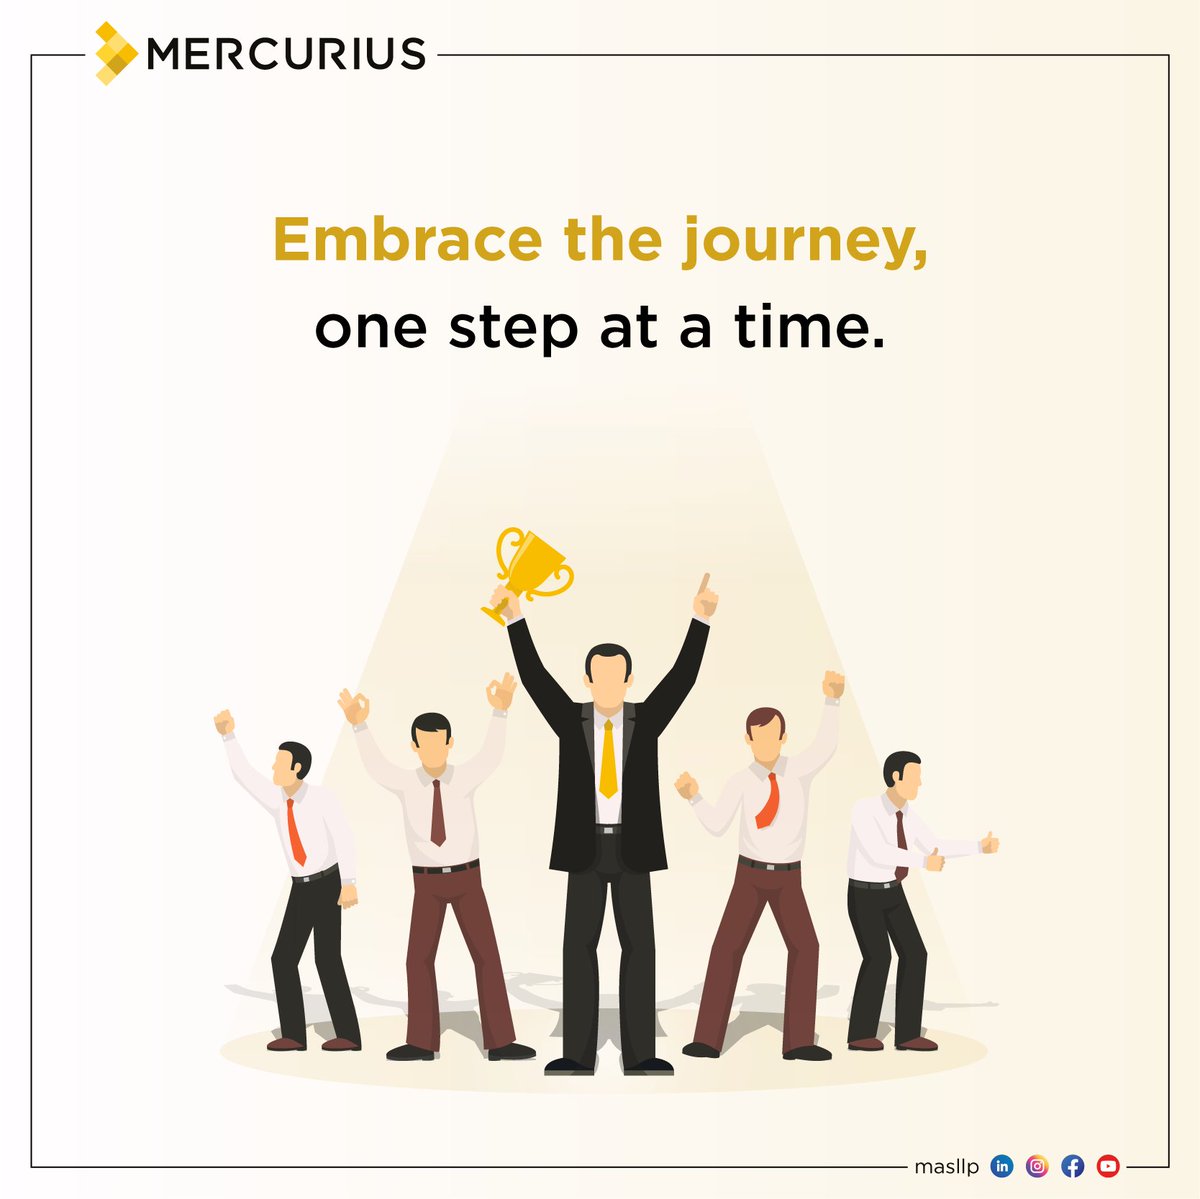 Every step counts on the journey to success. Let's embrace each moment and strive for greatness.

#LifeIsAJourney #AdventureAwaits #success #mondaymood #mondaymotivation #growth #trophy #successstory #mindset #growthmindset #sucessful #mondayvibes #mondaymantra